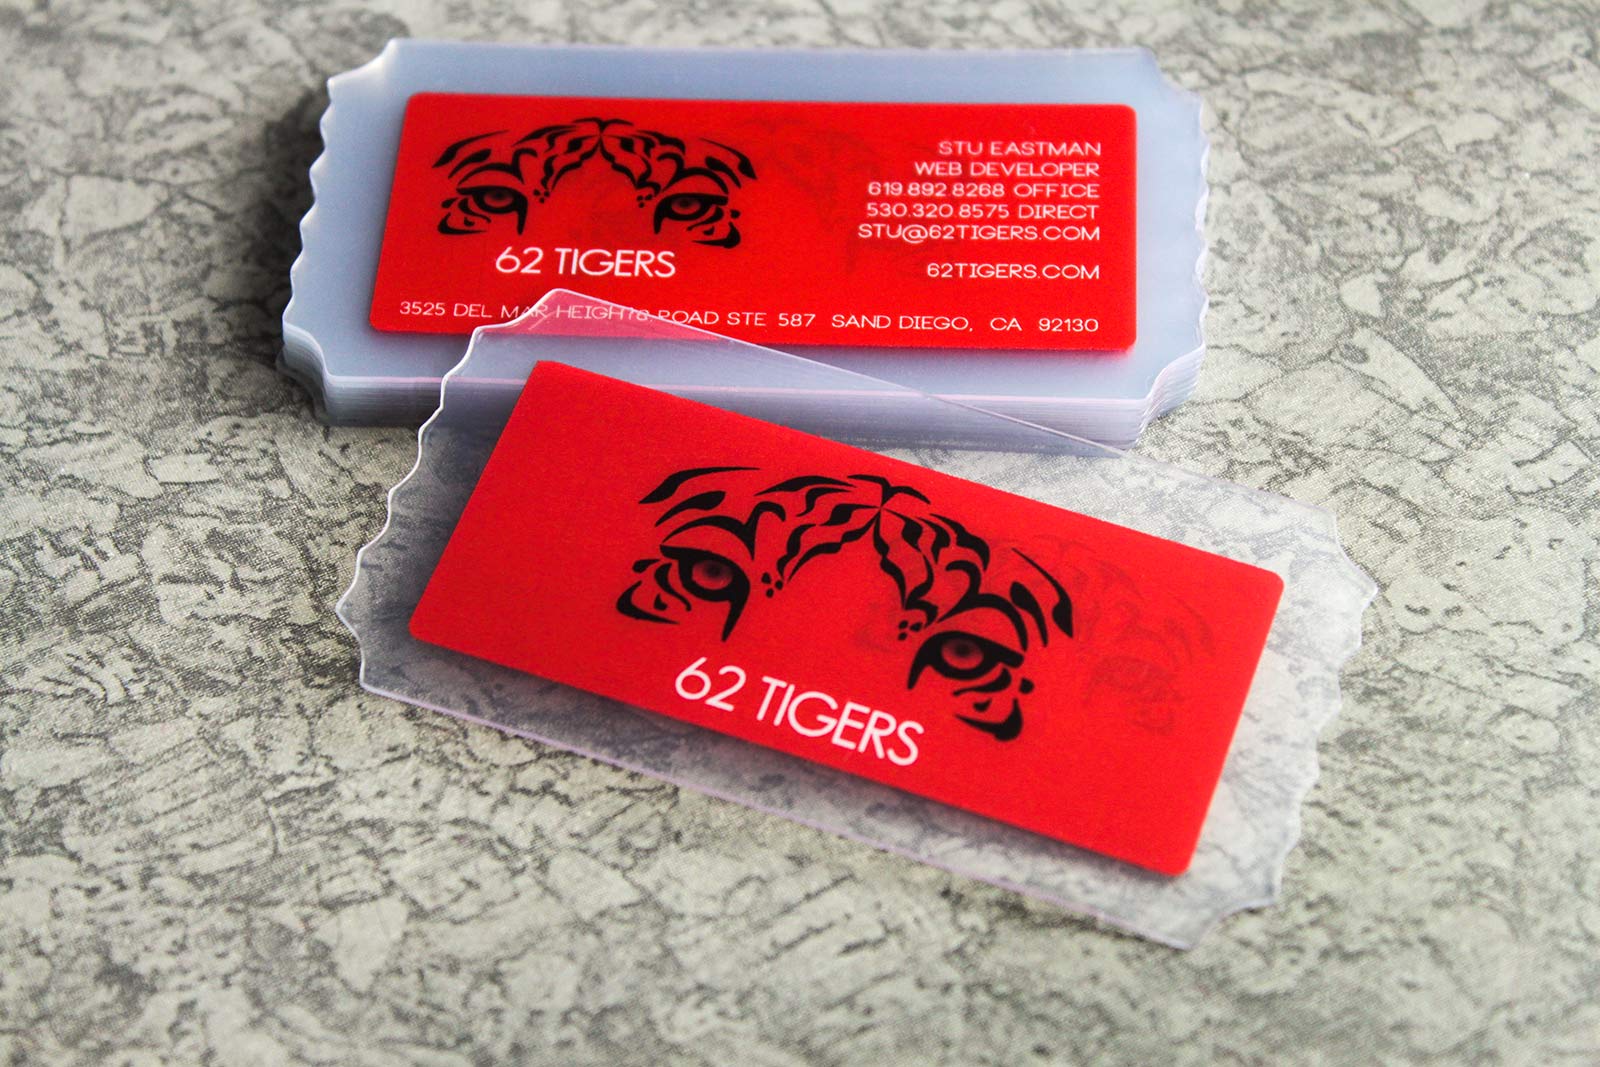 4 Ways to Make Your Business Card Stand Out